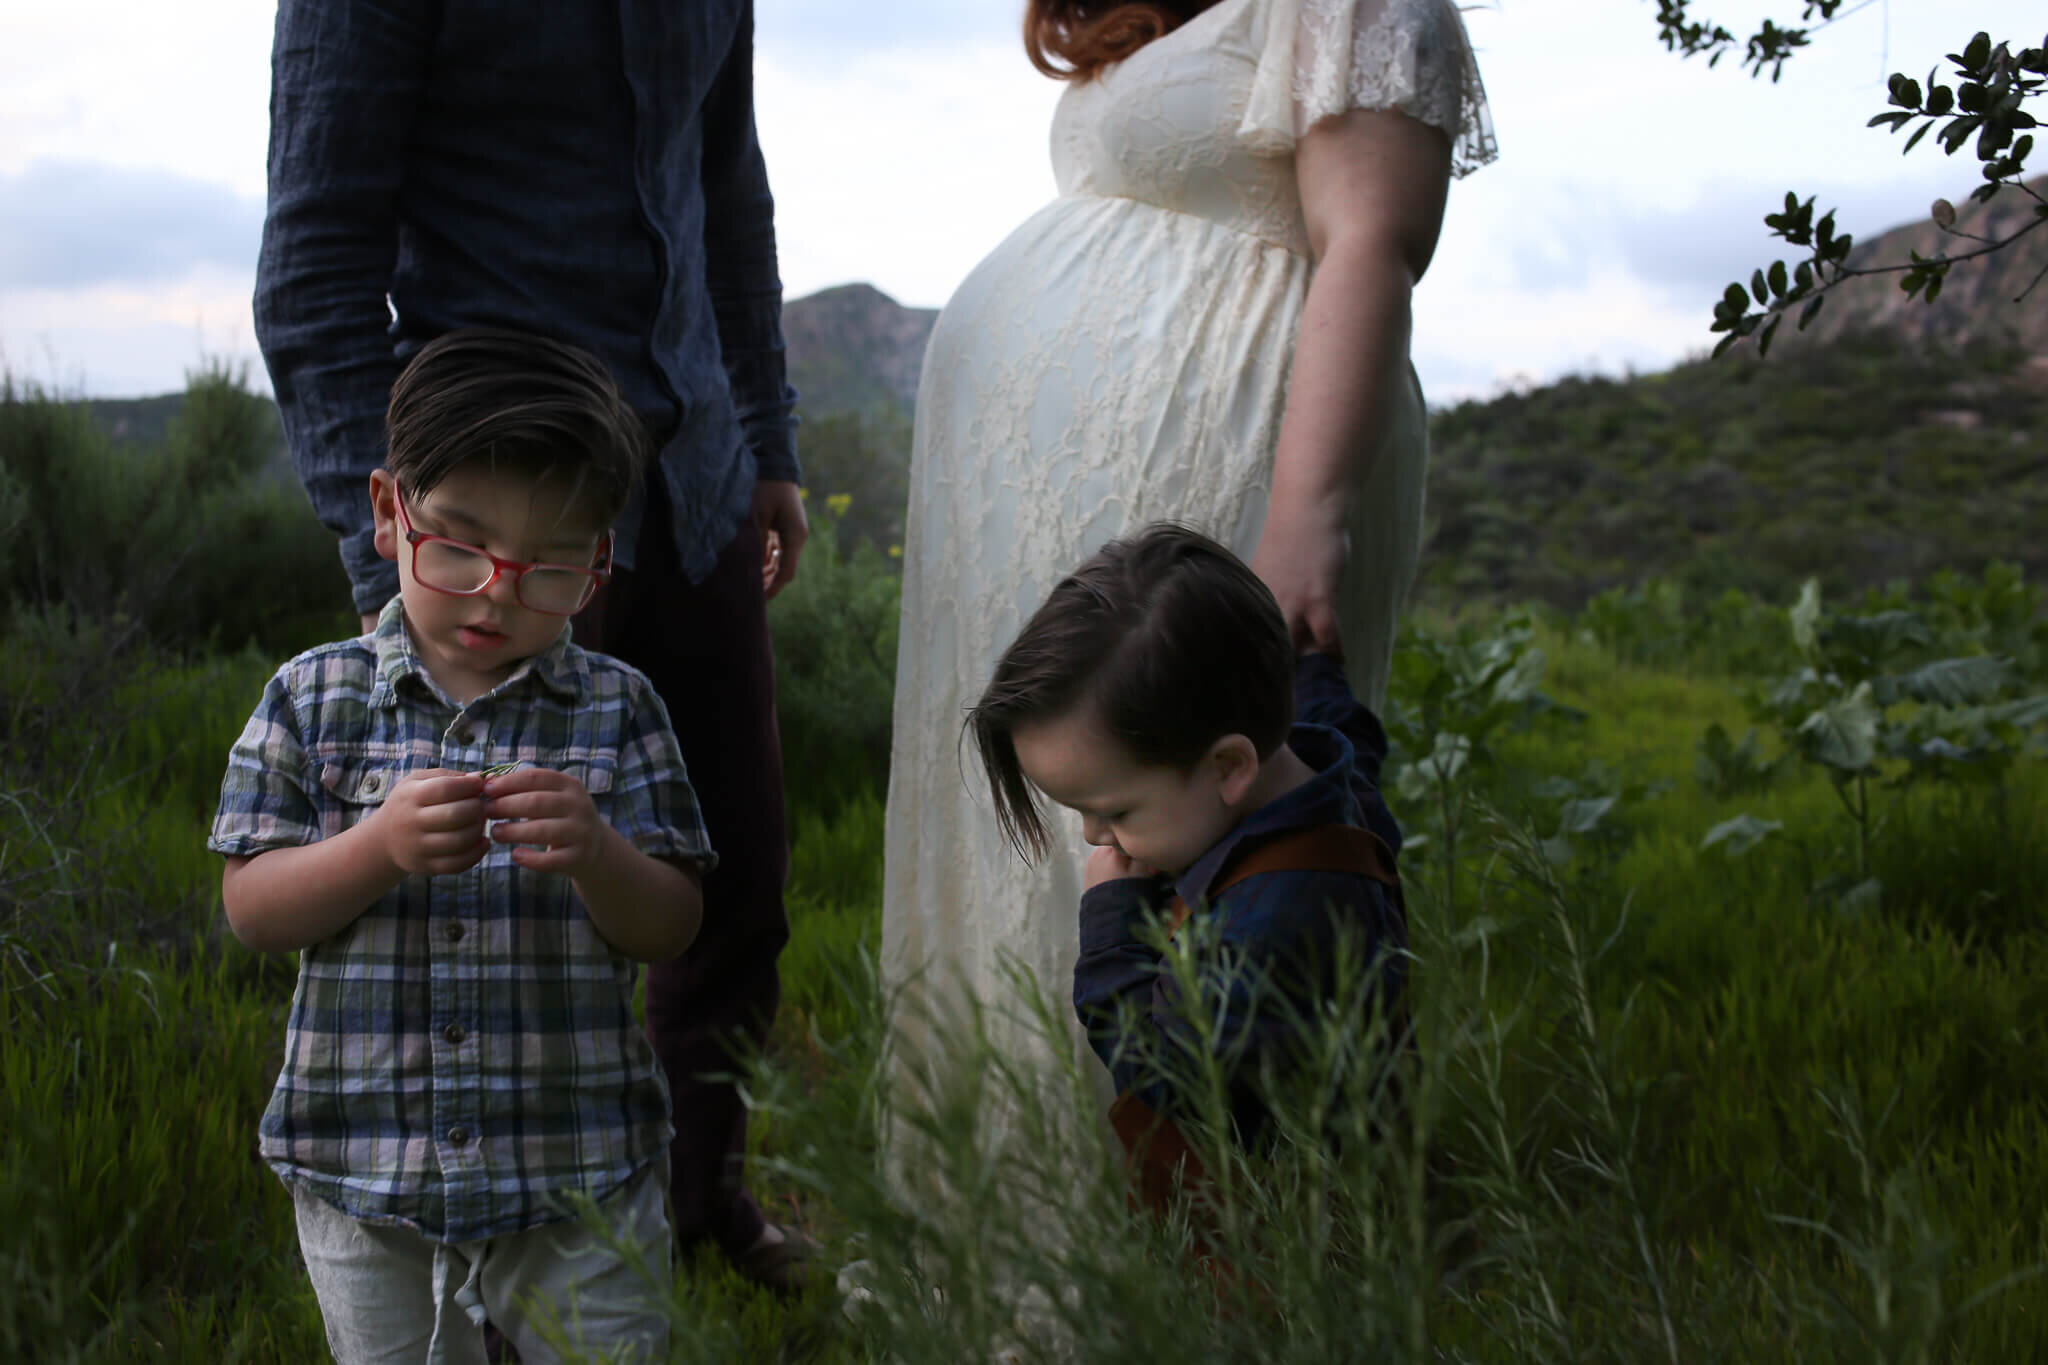  A picture of a closeup view of a family with two young boys playing while the pregnant mother and dad stand behind them in a grassy field with mountains in the background by Photography by L Rose 